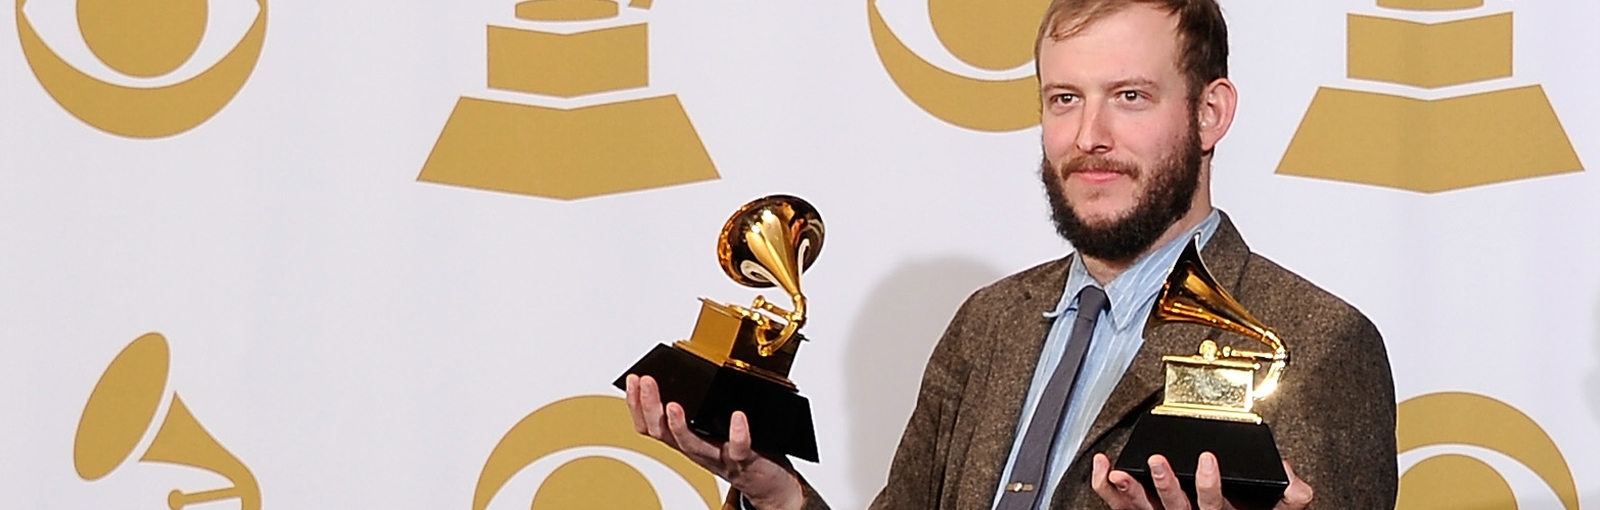 Indiecast Examines The Career And Impact Of Bon Iver - dee 1 sallie mae back code for roblox high school